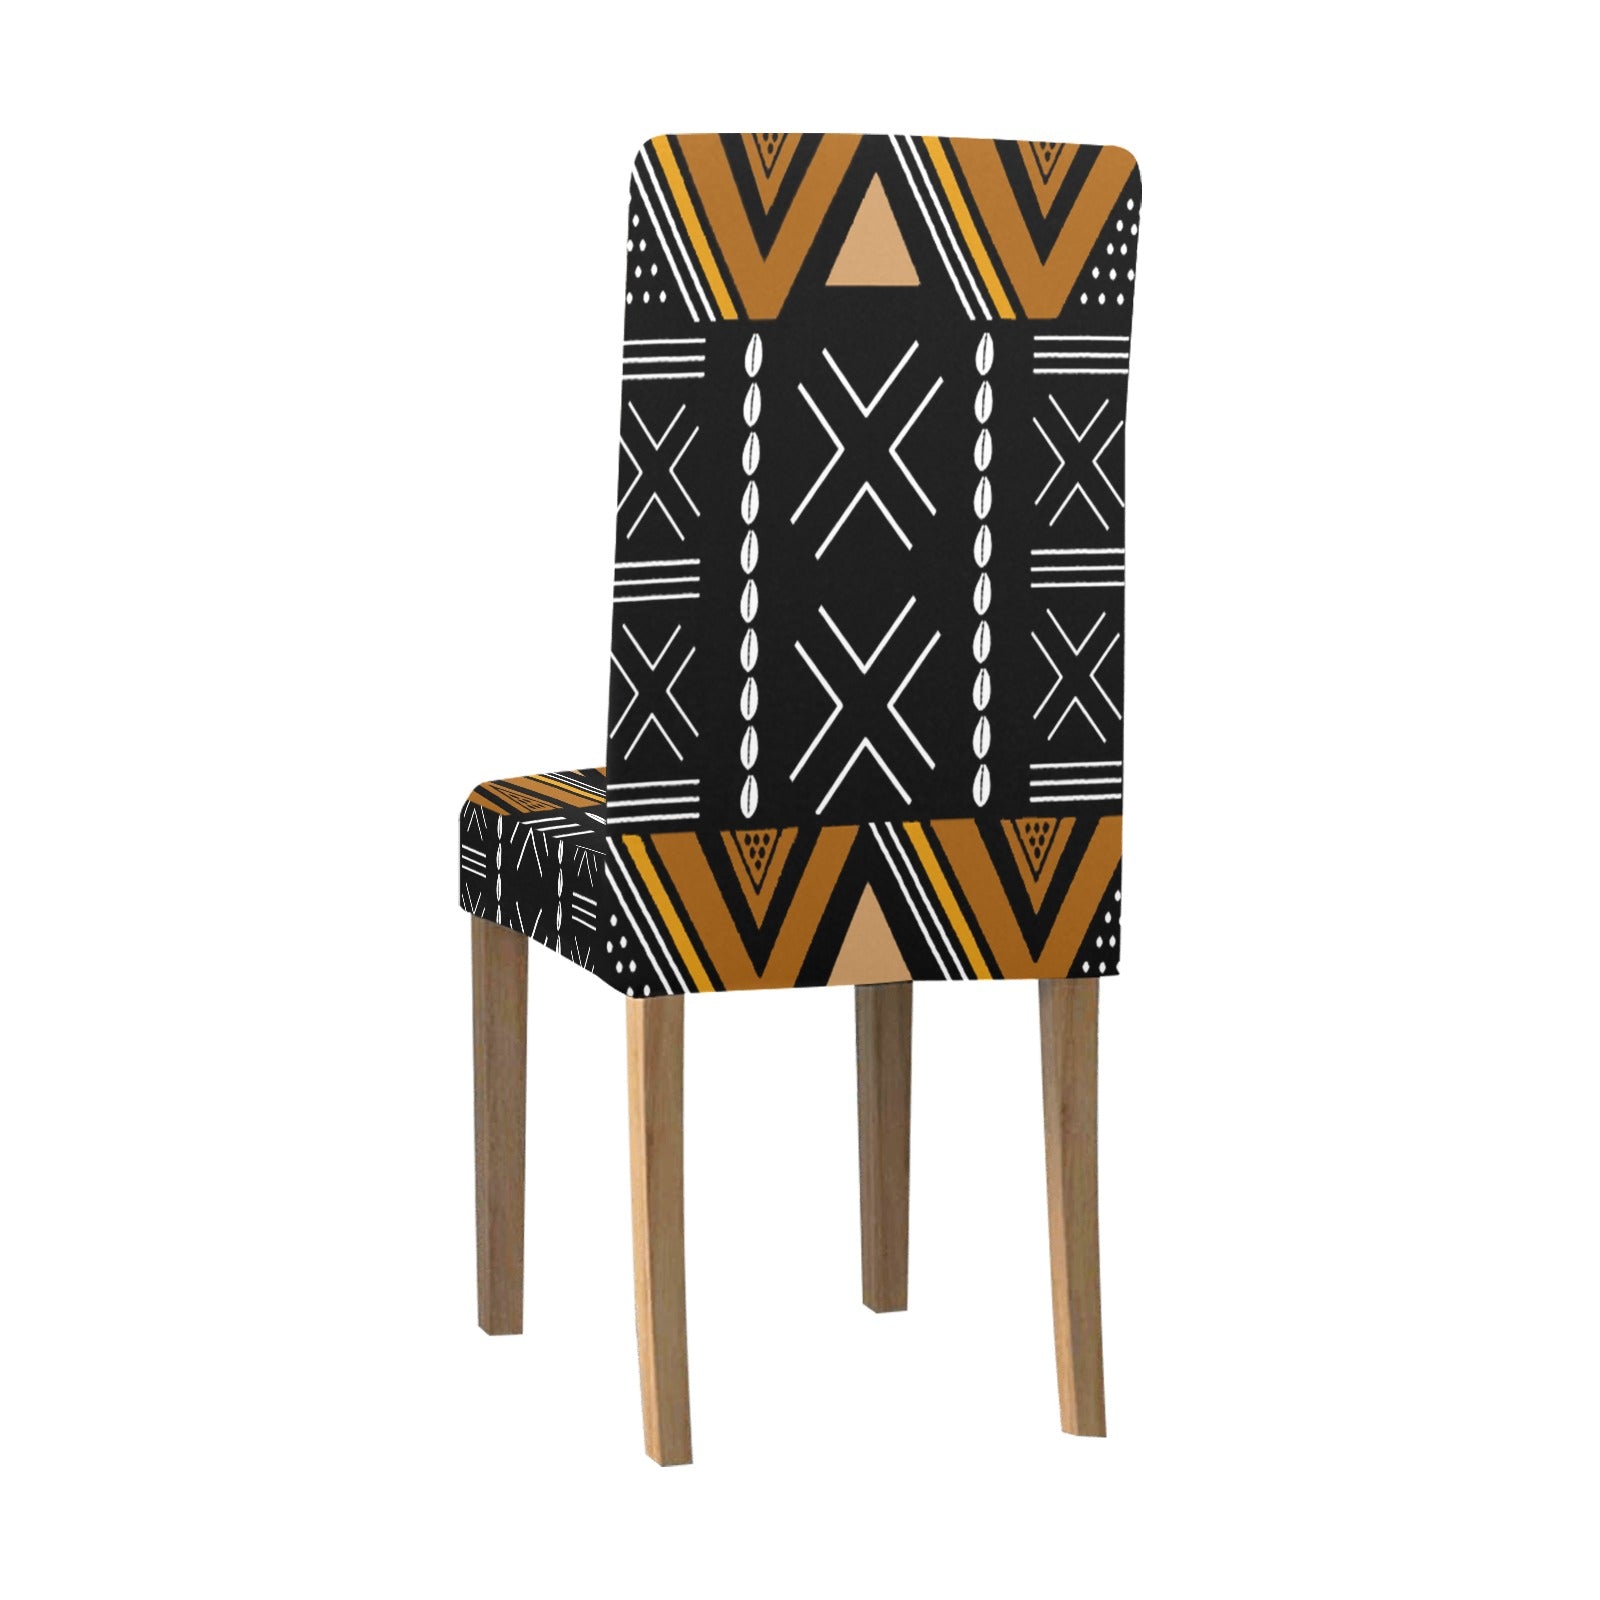 African Removable Chair Cover Tribal Print -Bynelo